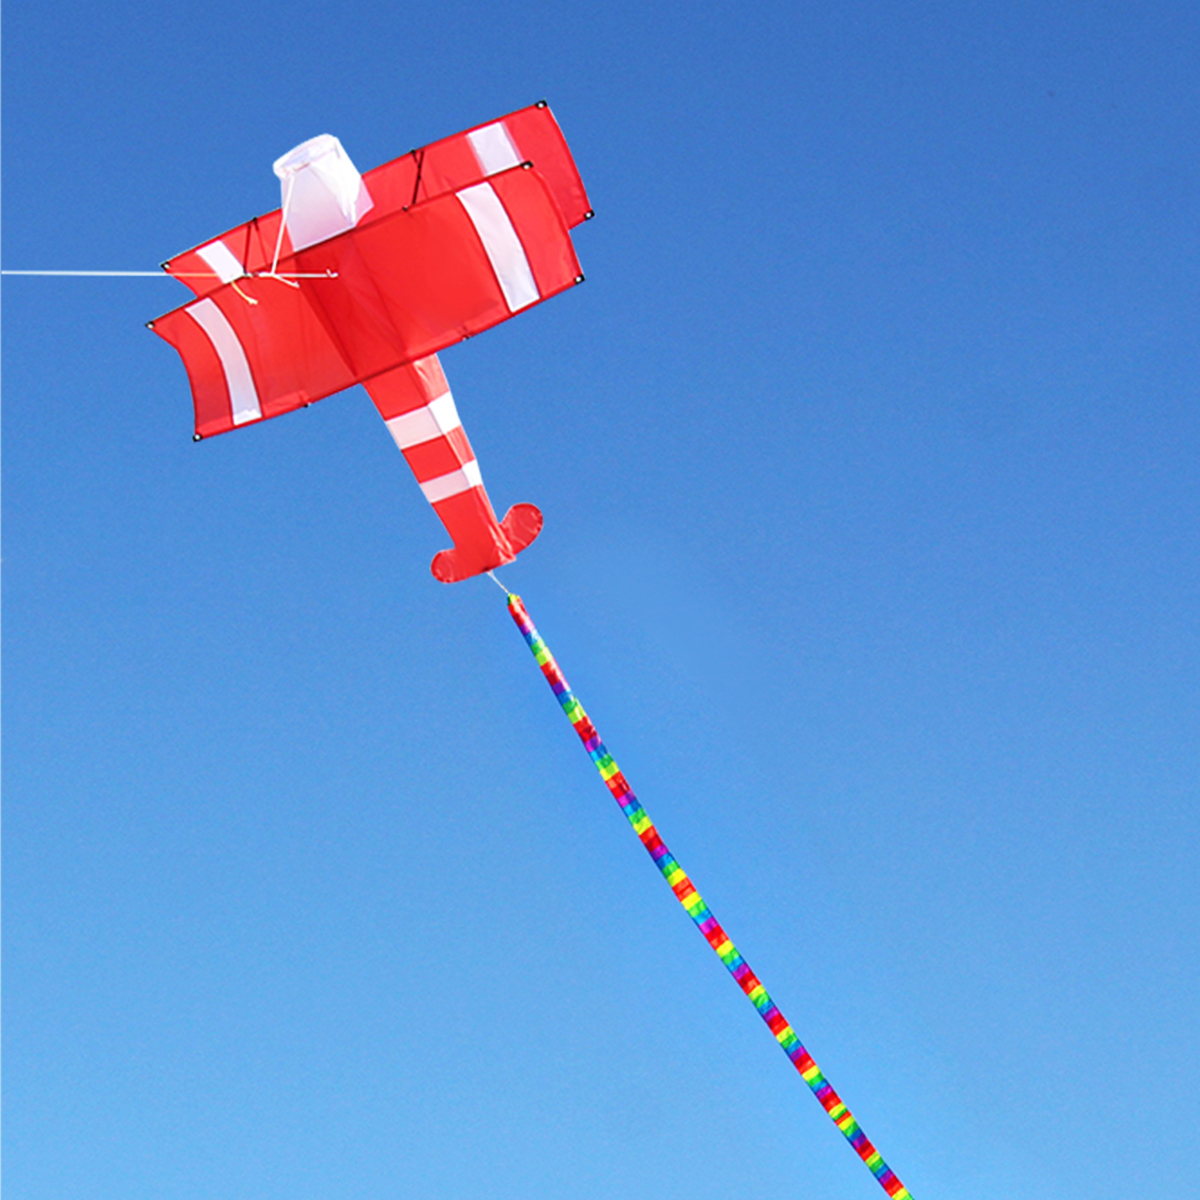 Colorful-3D-Aircraft-Kite-With-Handle-and-Line-Good-Flying-Gift-1610431-3